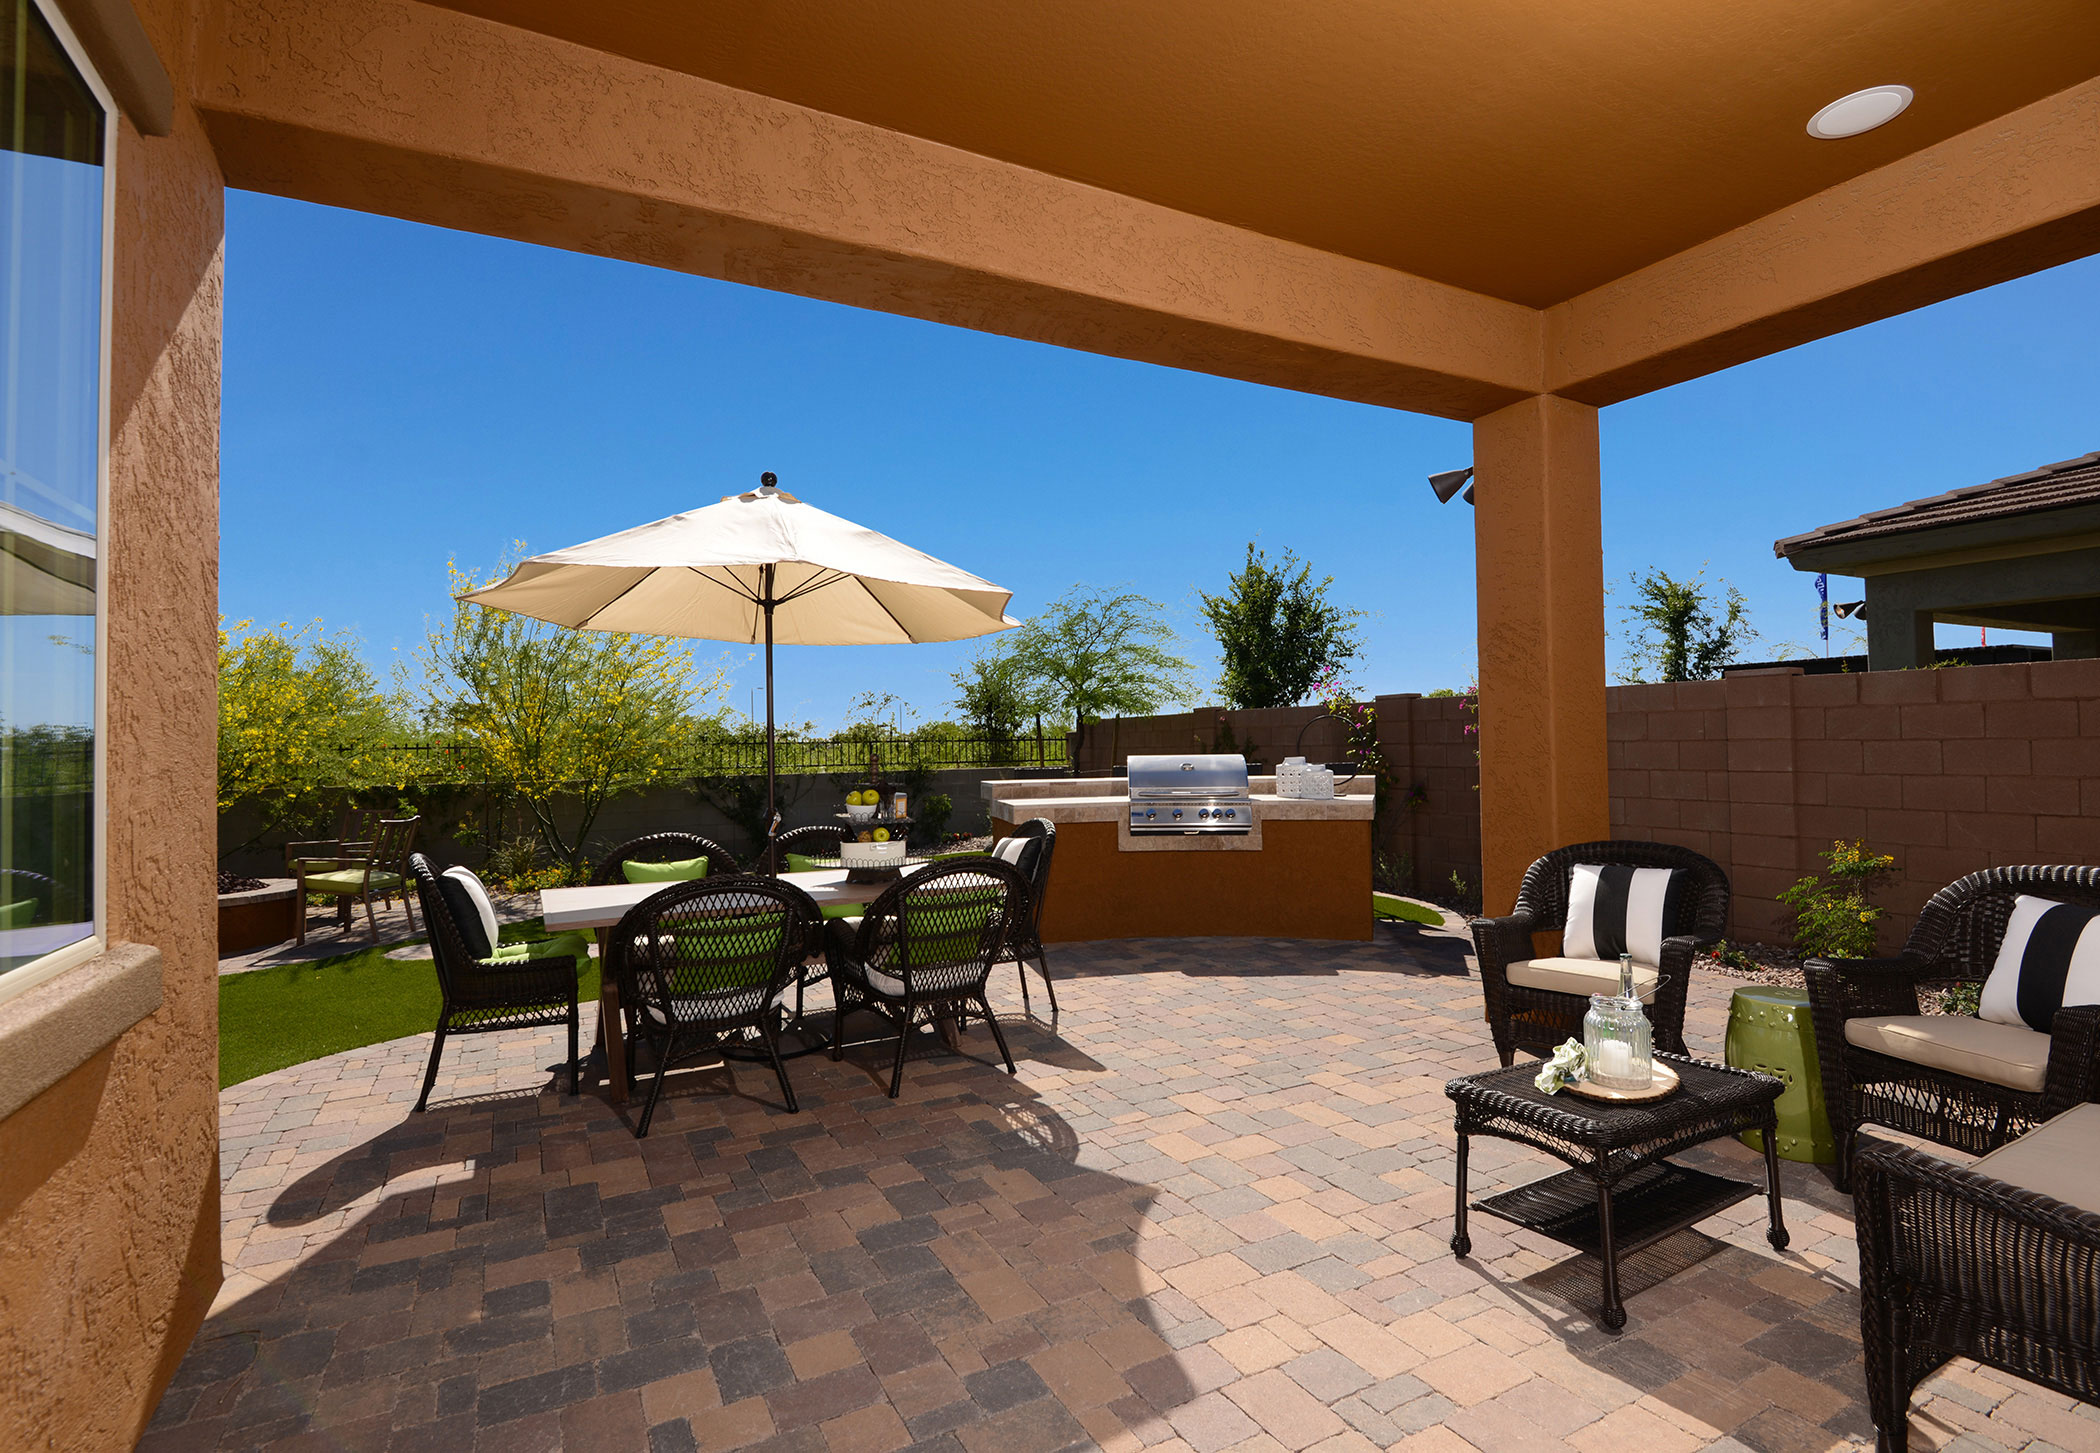 In addition to touring two new models from the Arizona homebuilder, Arizona homebuyers can also enjoy a backyard barbecue luau, free ice cream and refreshments.